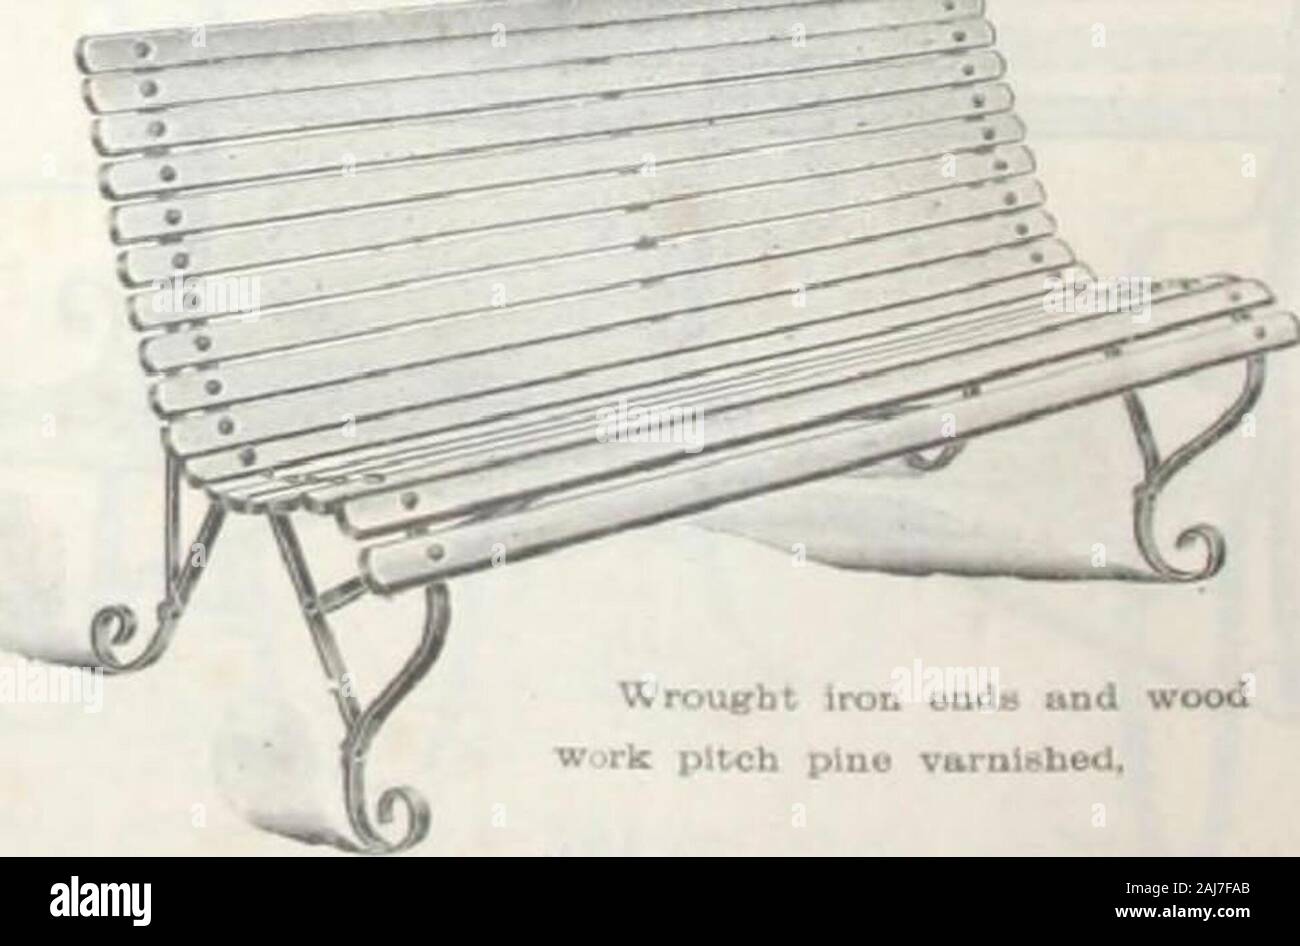 Wrinch Sons Garden Furniture And Requisites No 146 A L U8 S